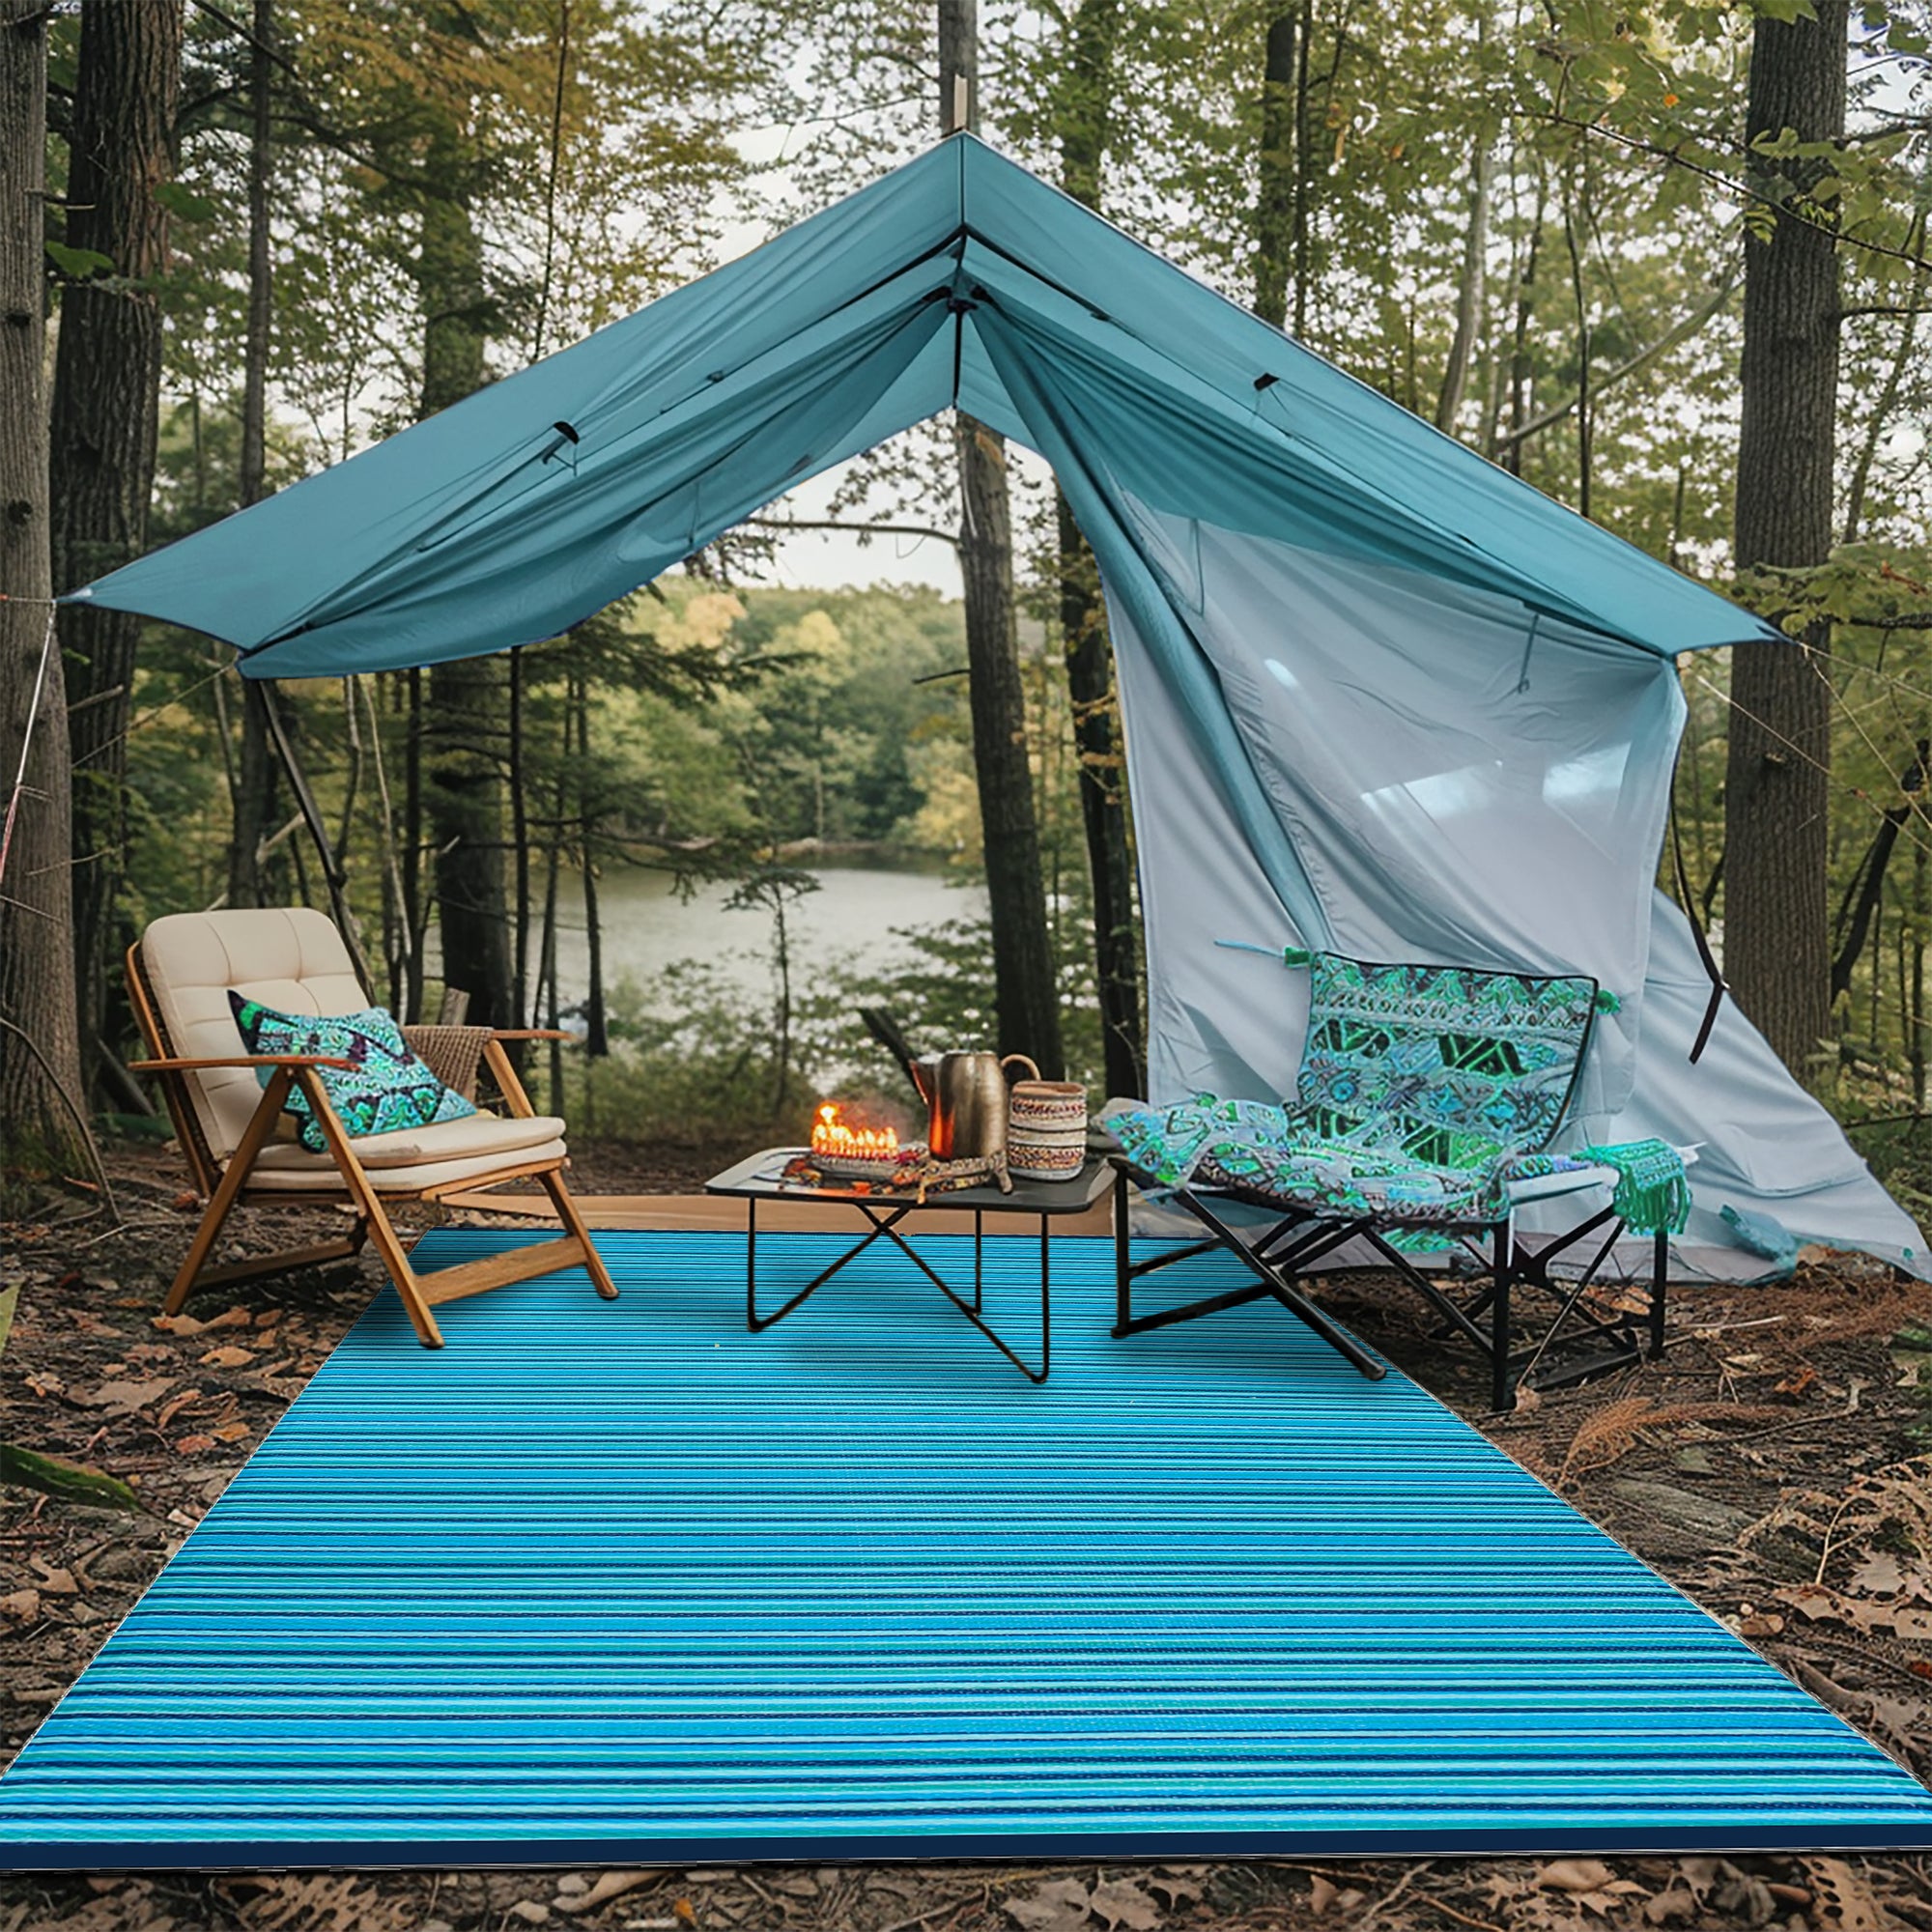 Weaver Outdoor Recycled Plastic Rug for Camping ( Turquoise Blue )